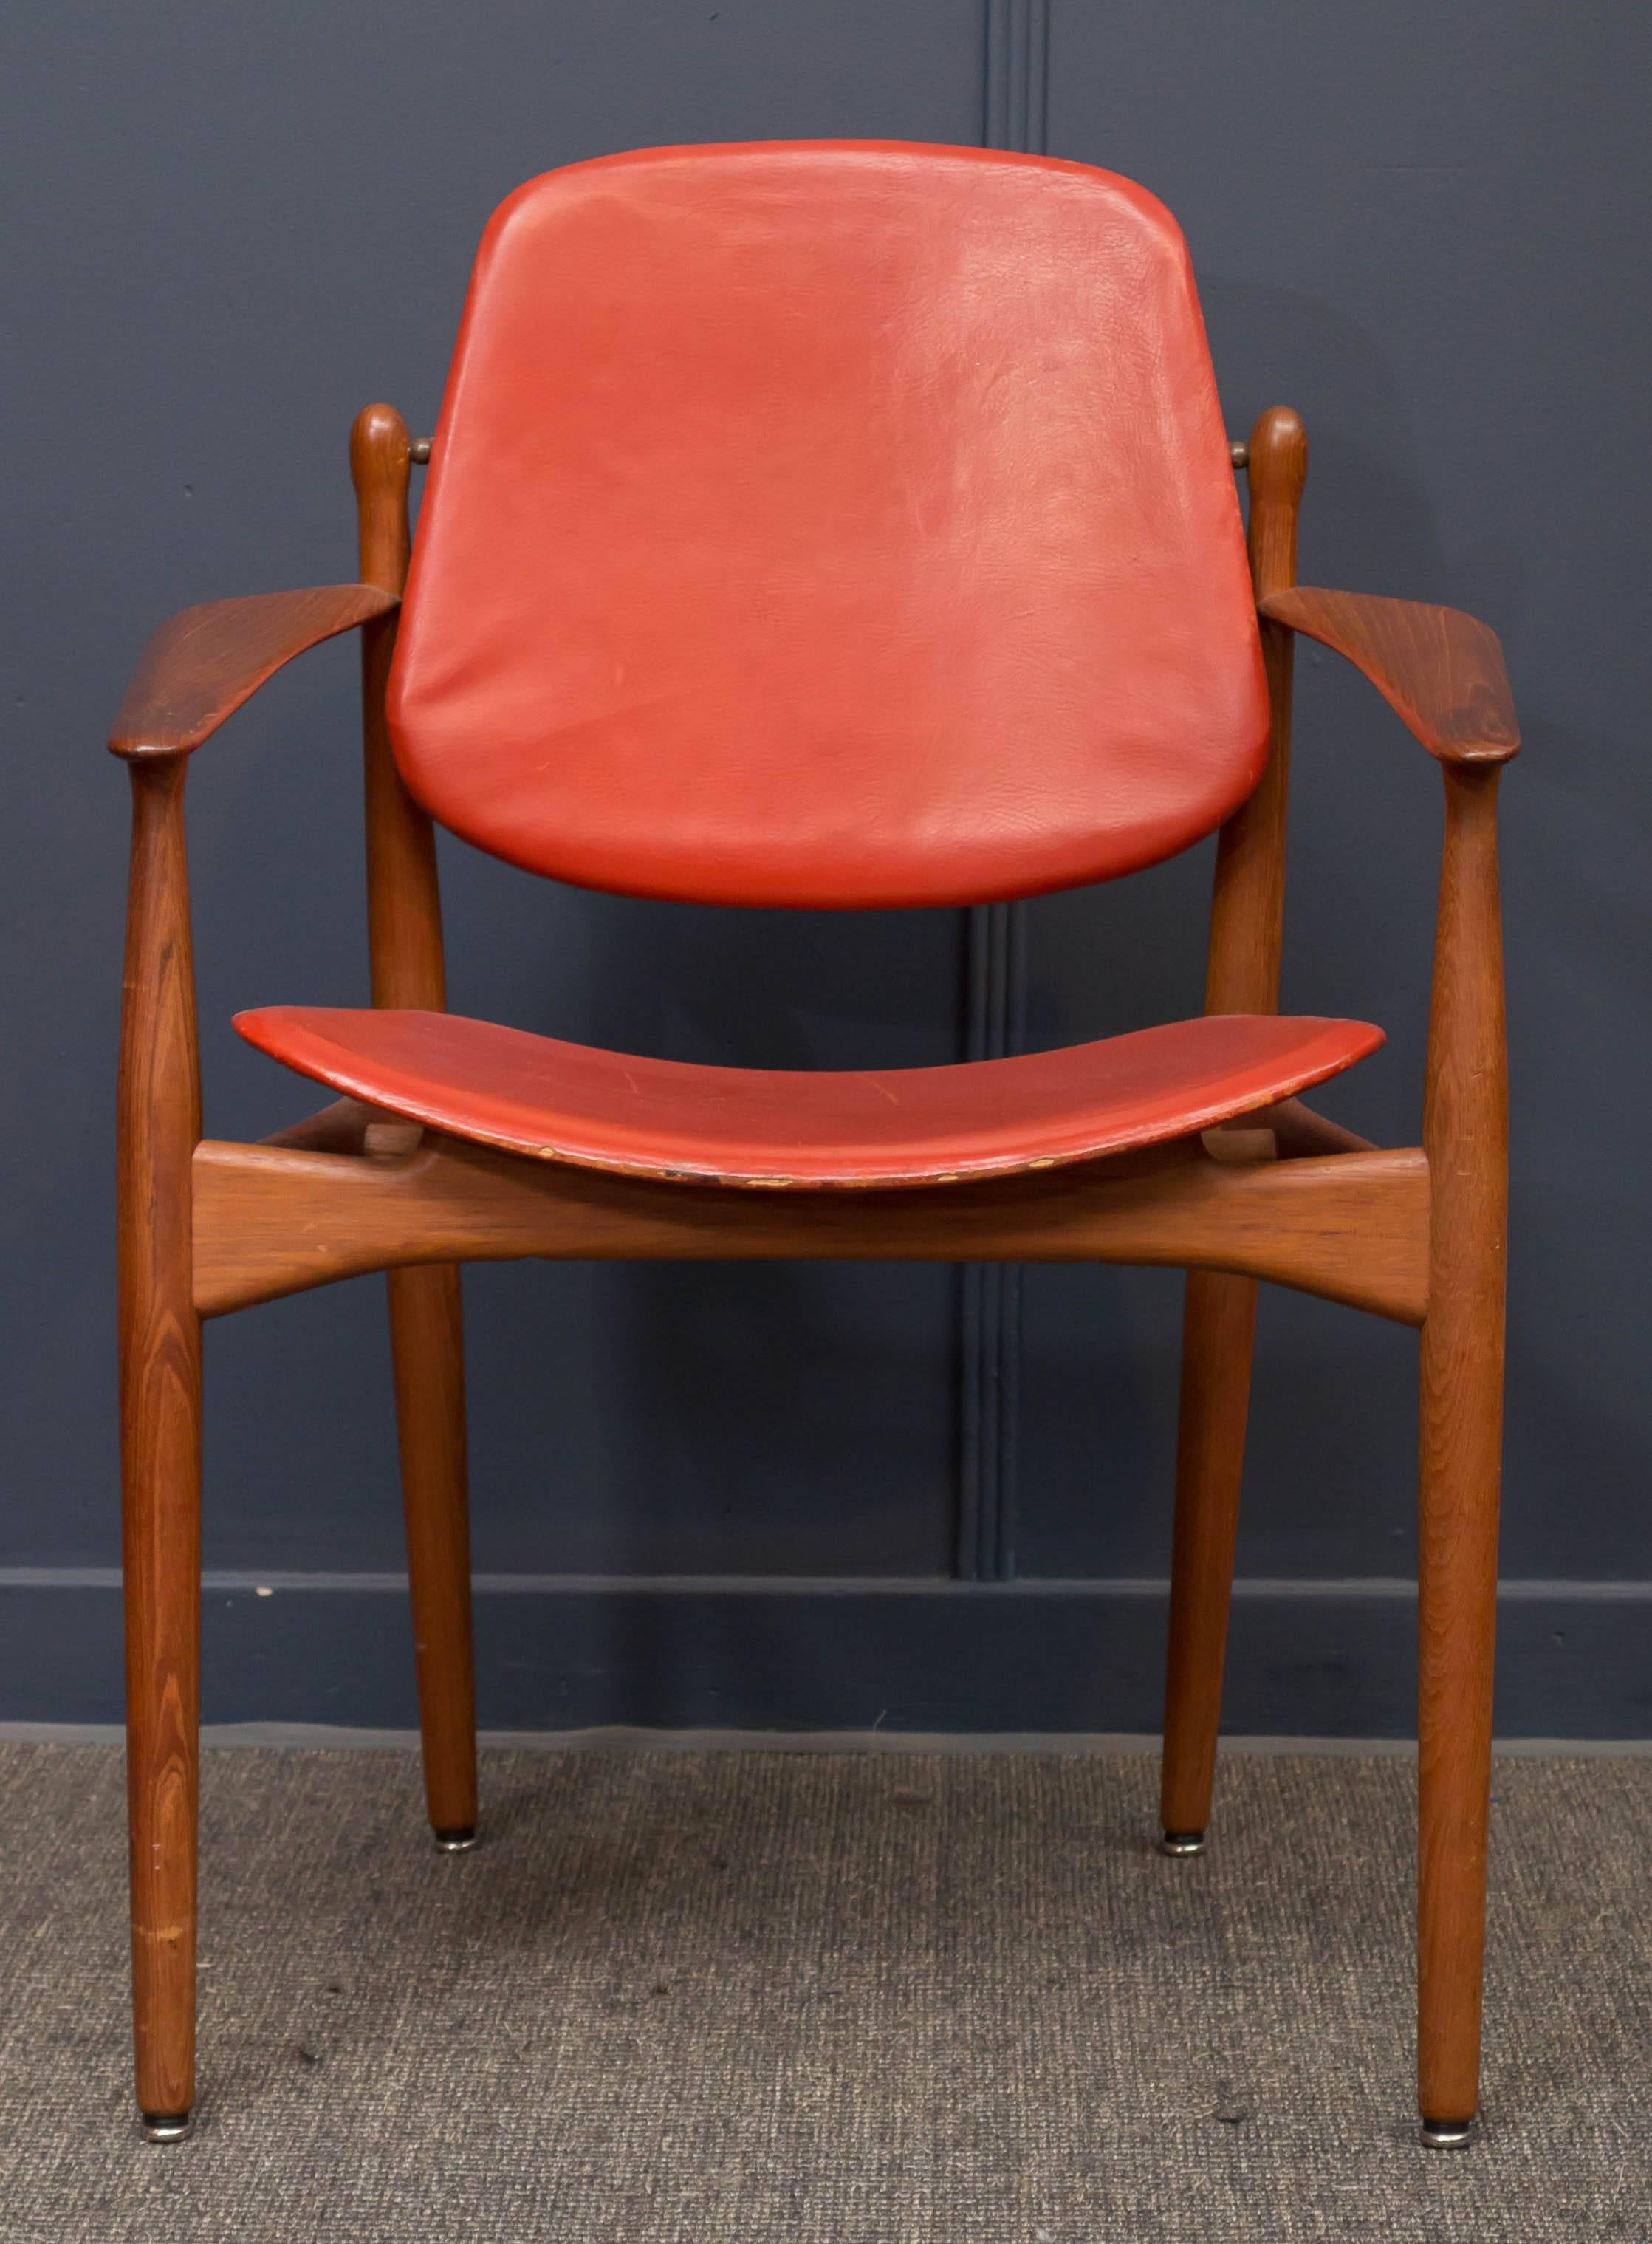 Arne Vodder design armchair model 184 for France & Daverksen, Denmark.
Very good original condition desk or pull up chair with original orange leather, labeled and tagged.